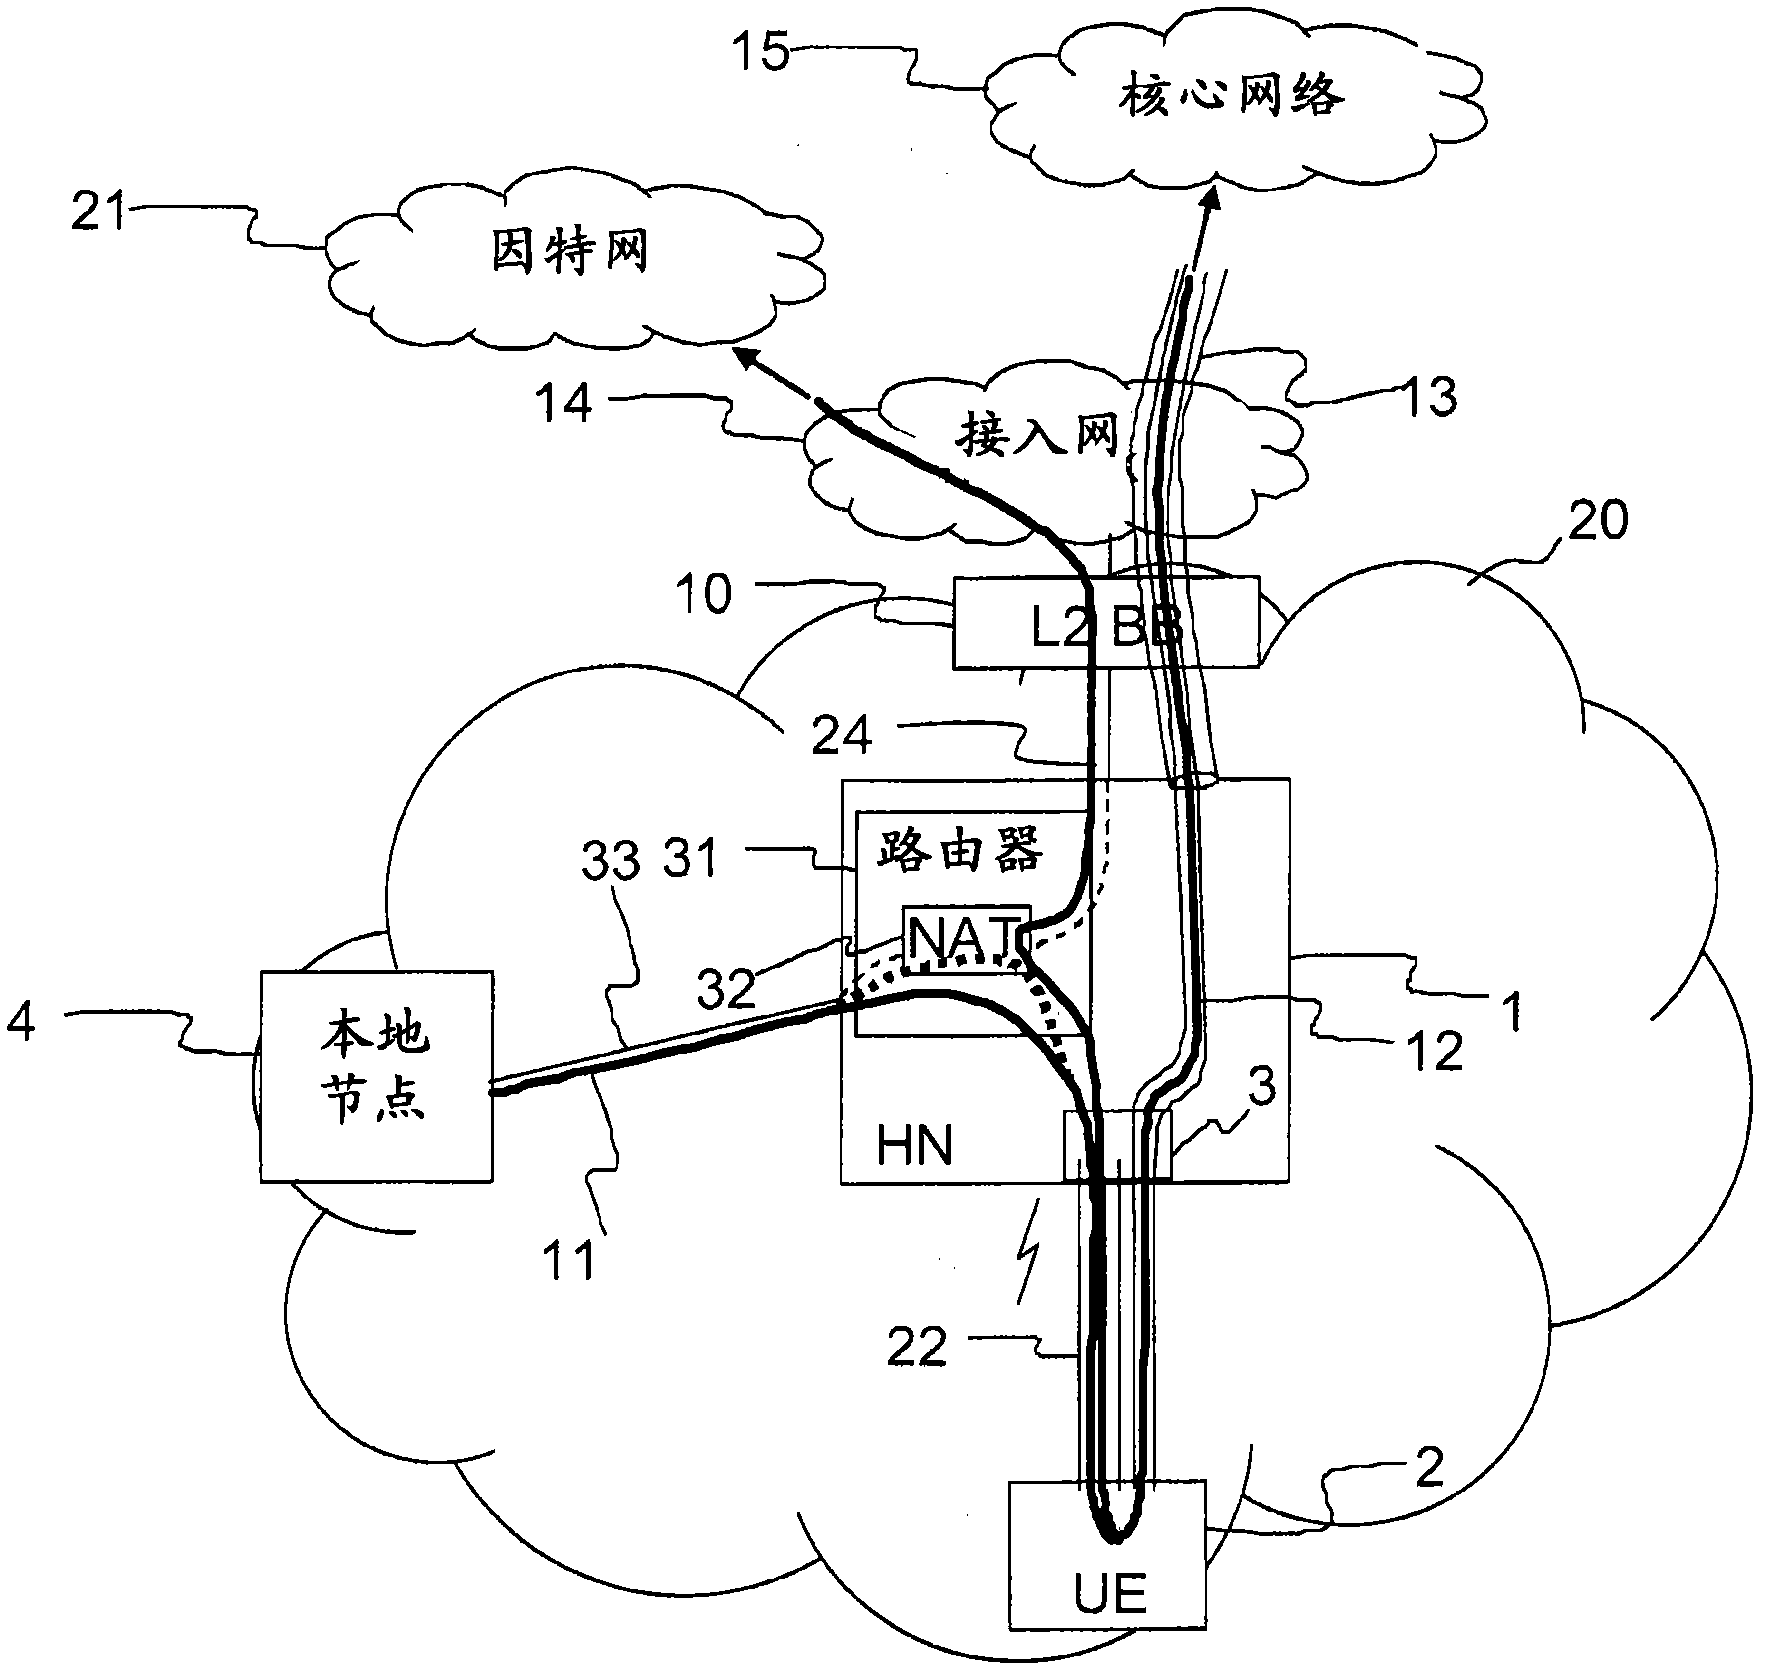 Handling of local breakout traffic in a home base station